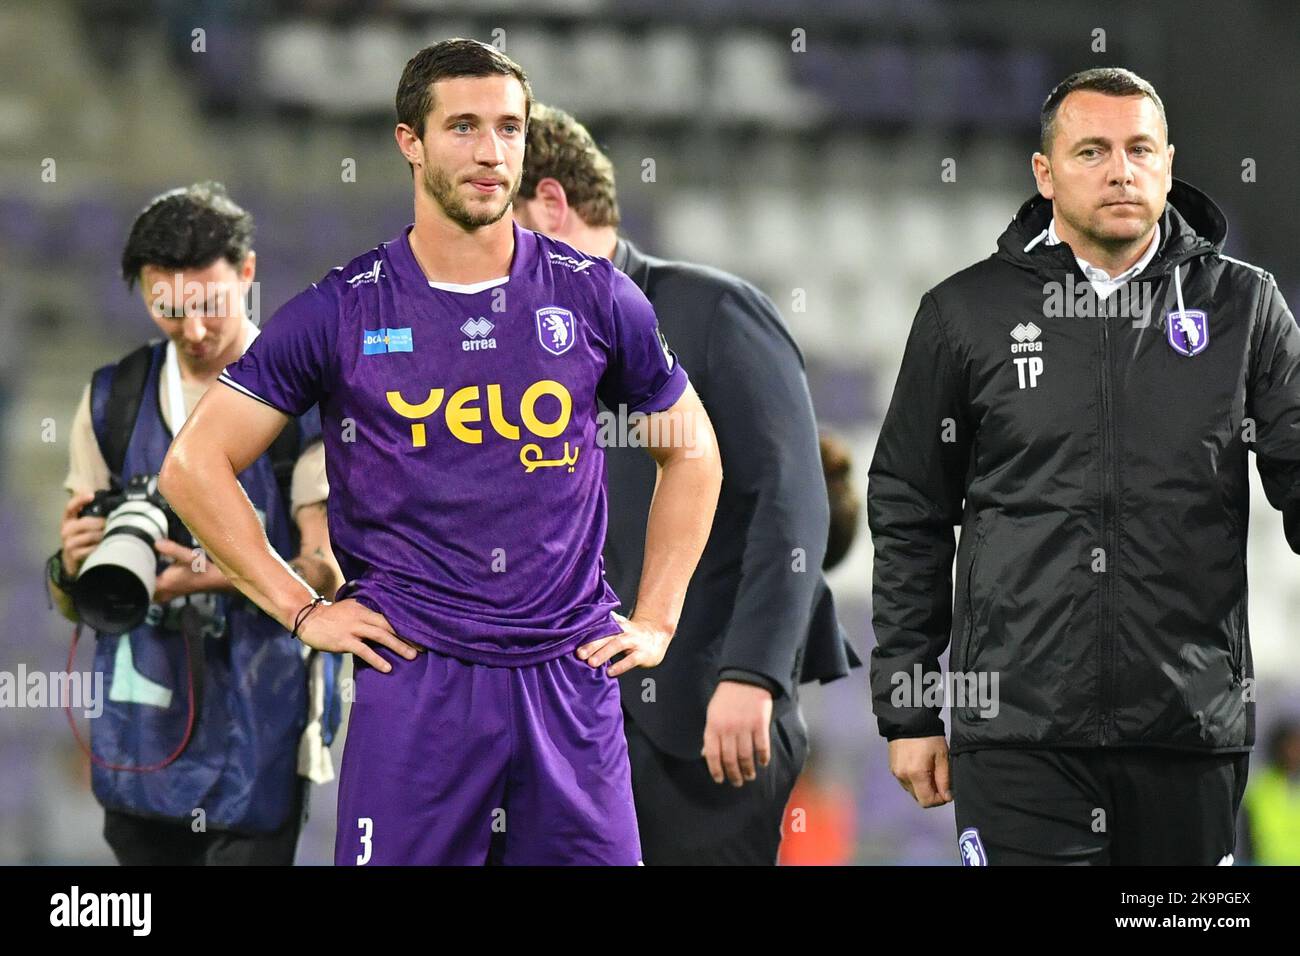 Beerschot's Herve Matthys looks dejected after losing a soccer match between K. Beerschot V.A. and RSCA Futures, Saturday 29 October 2022 in Antwerp, on day 11 of the 2022-2023 'Challenger Pro League' first division of the Belgian championship. BELGA PHOTO JILL DELSAUX Credit: Belga News Agency/Alamy Live News Stock Photo